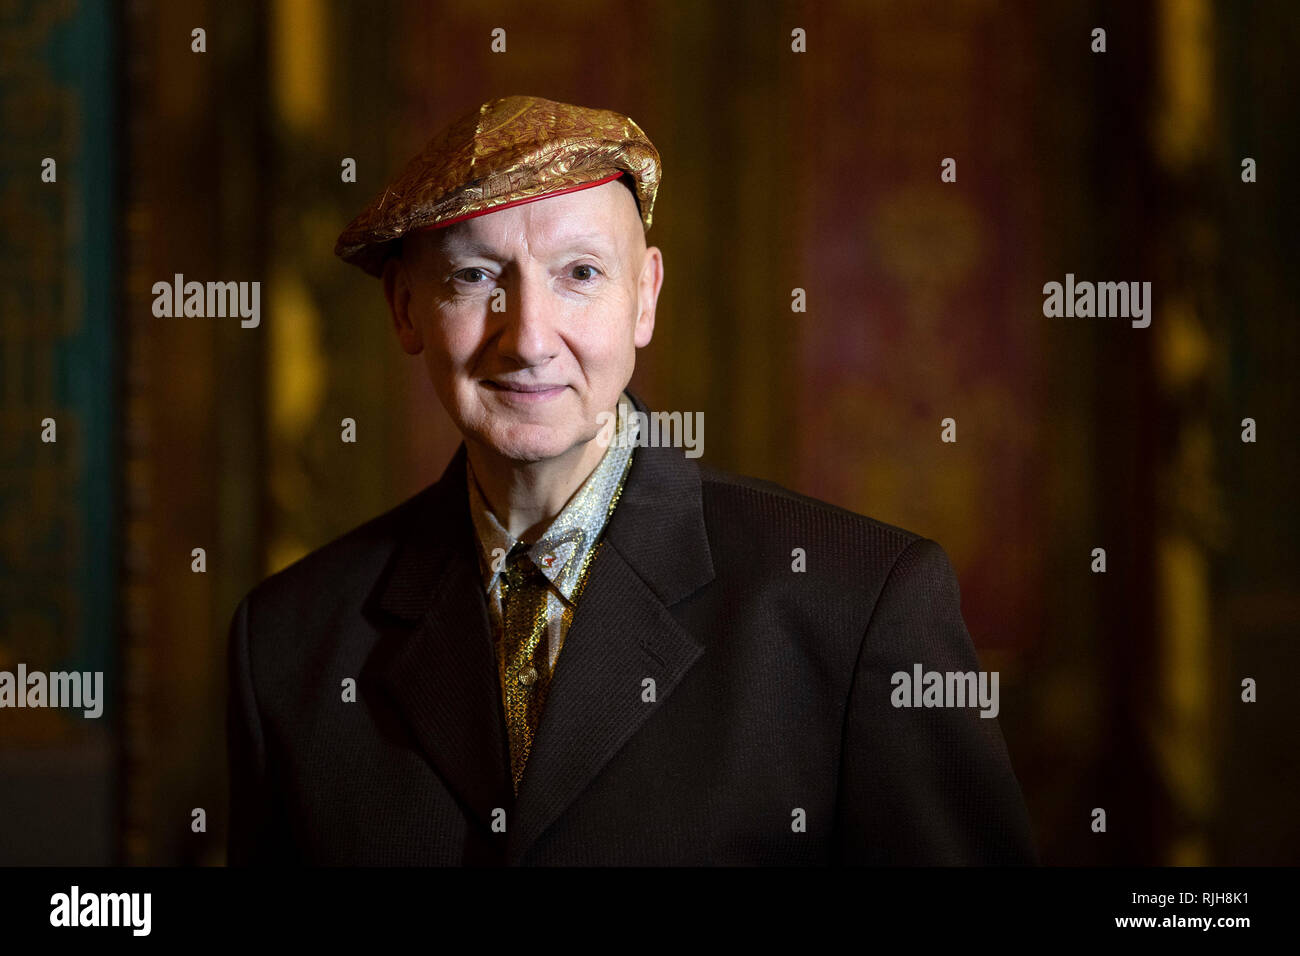 Milliner Stephen Jones at the launch of Chinoiserie-on-Sea exhibition which will fill the rooms of the Royal Pavilion, Brighton, East Sussex, with dozens of hats made by Jones throughout his 40-year career. Stock Photo